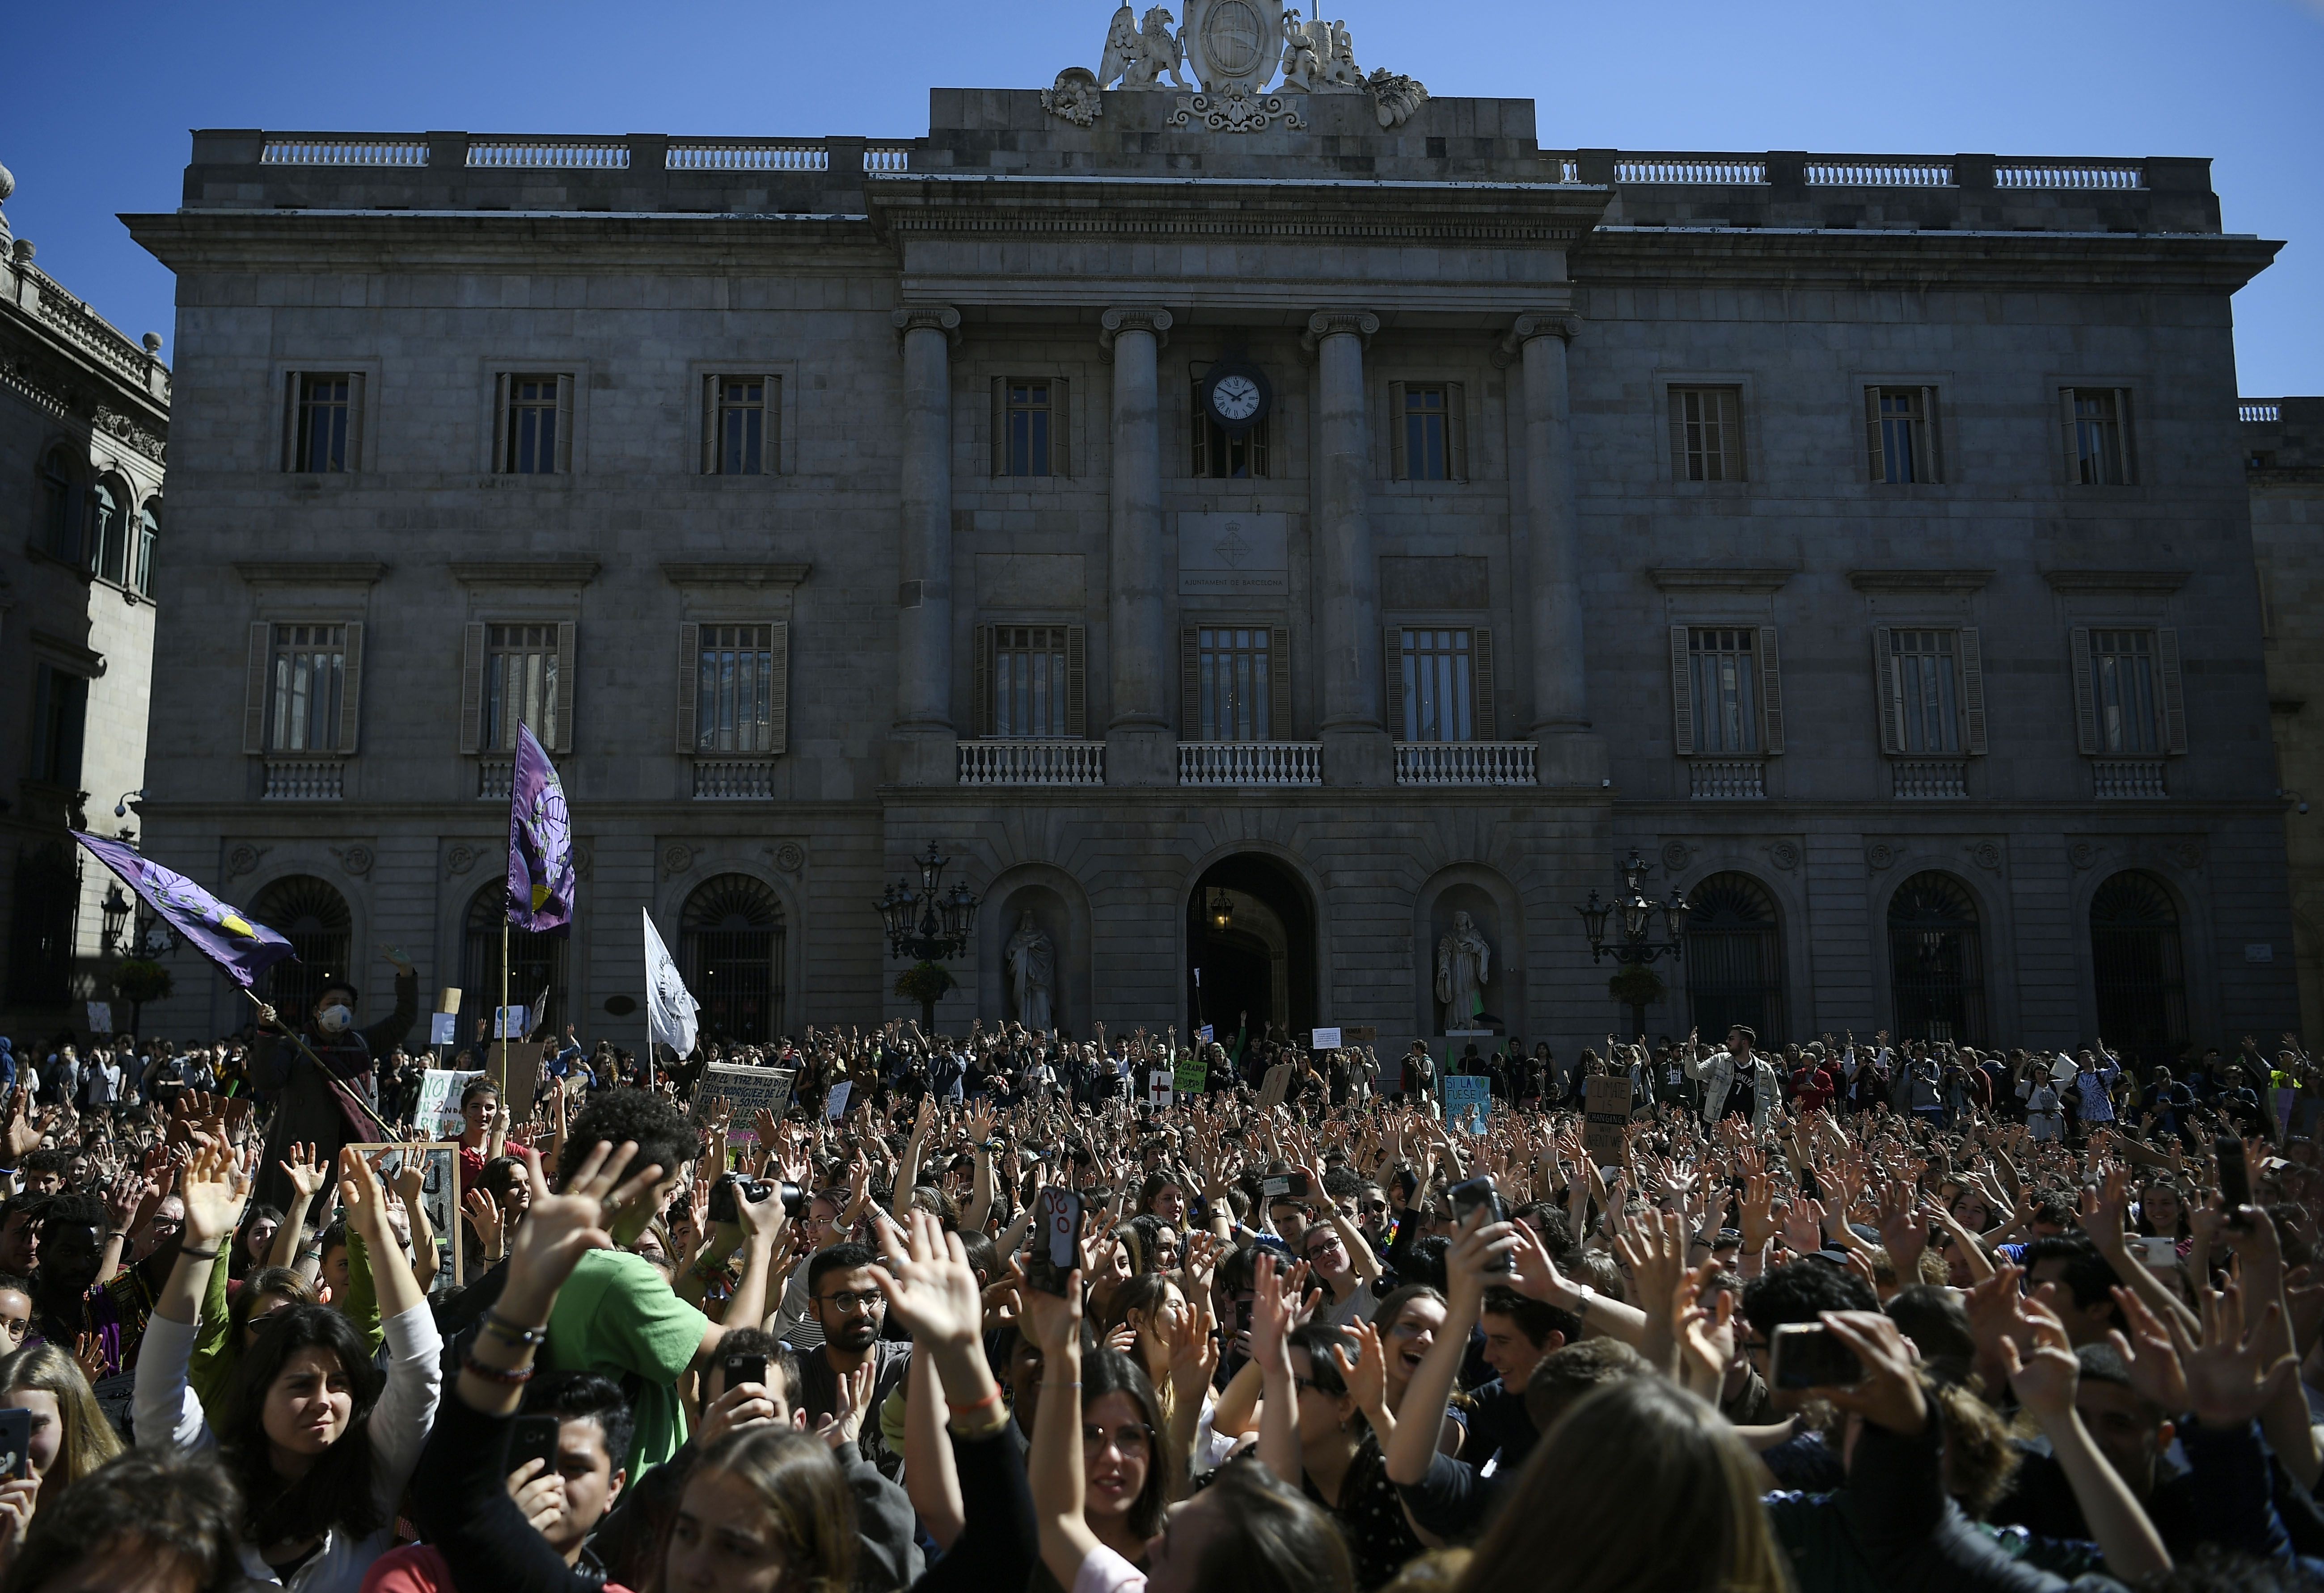 A large sea of student protestors stand in front of a grand building in Madrid.